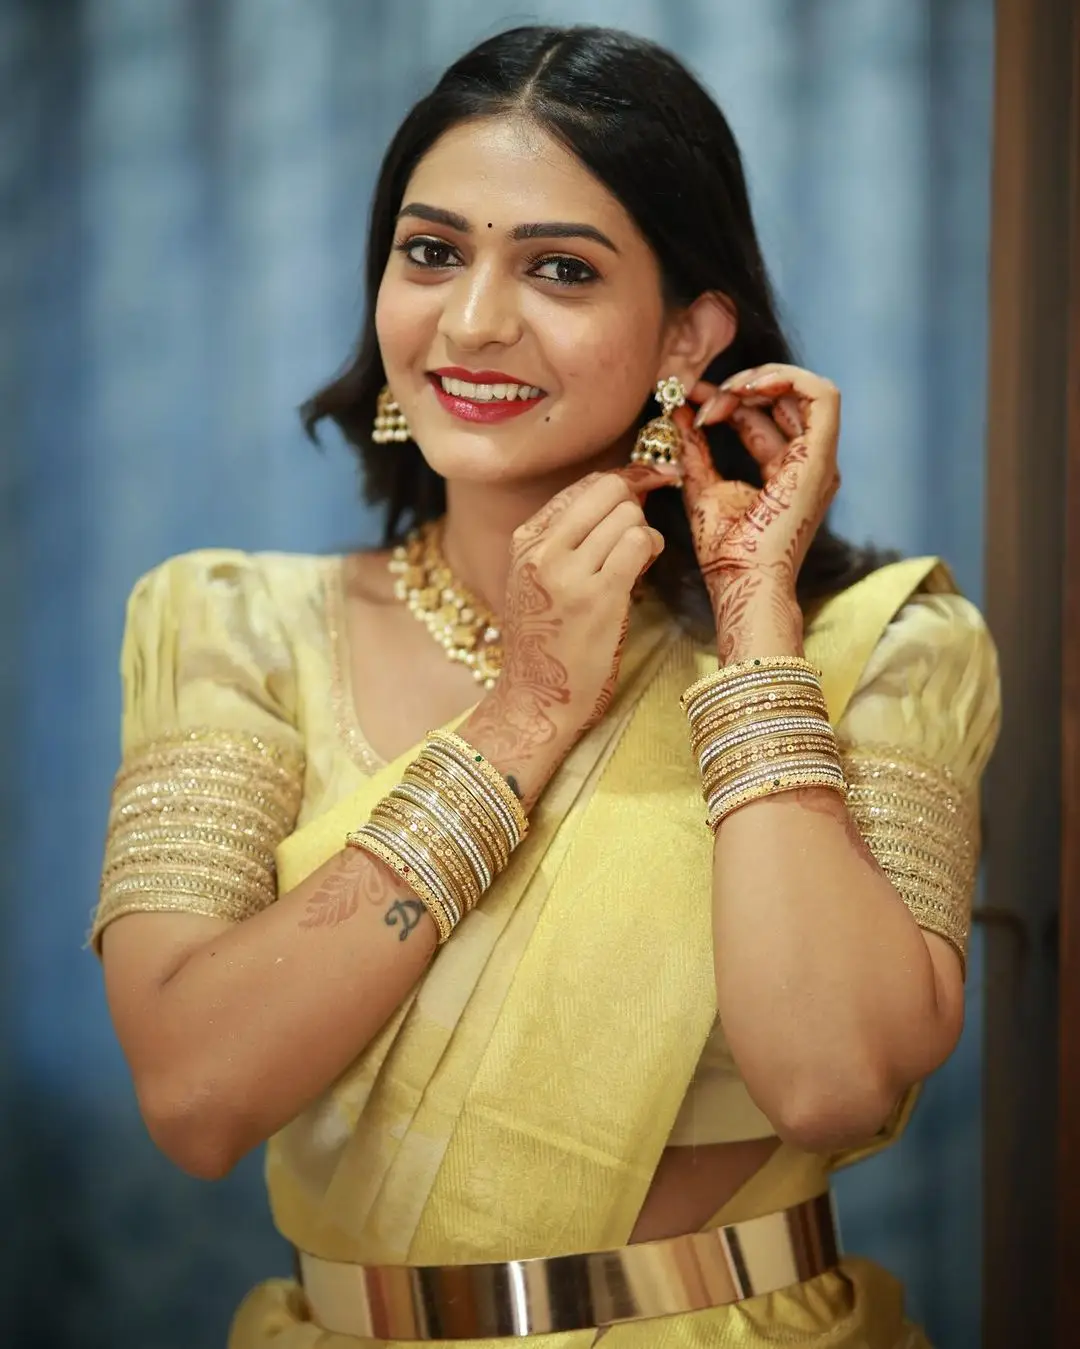 NISARGA GOWDA IN SOUTH INDIAN TRADITIONAL YELLOW SAREE BLOUSE